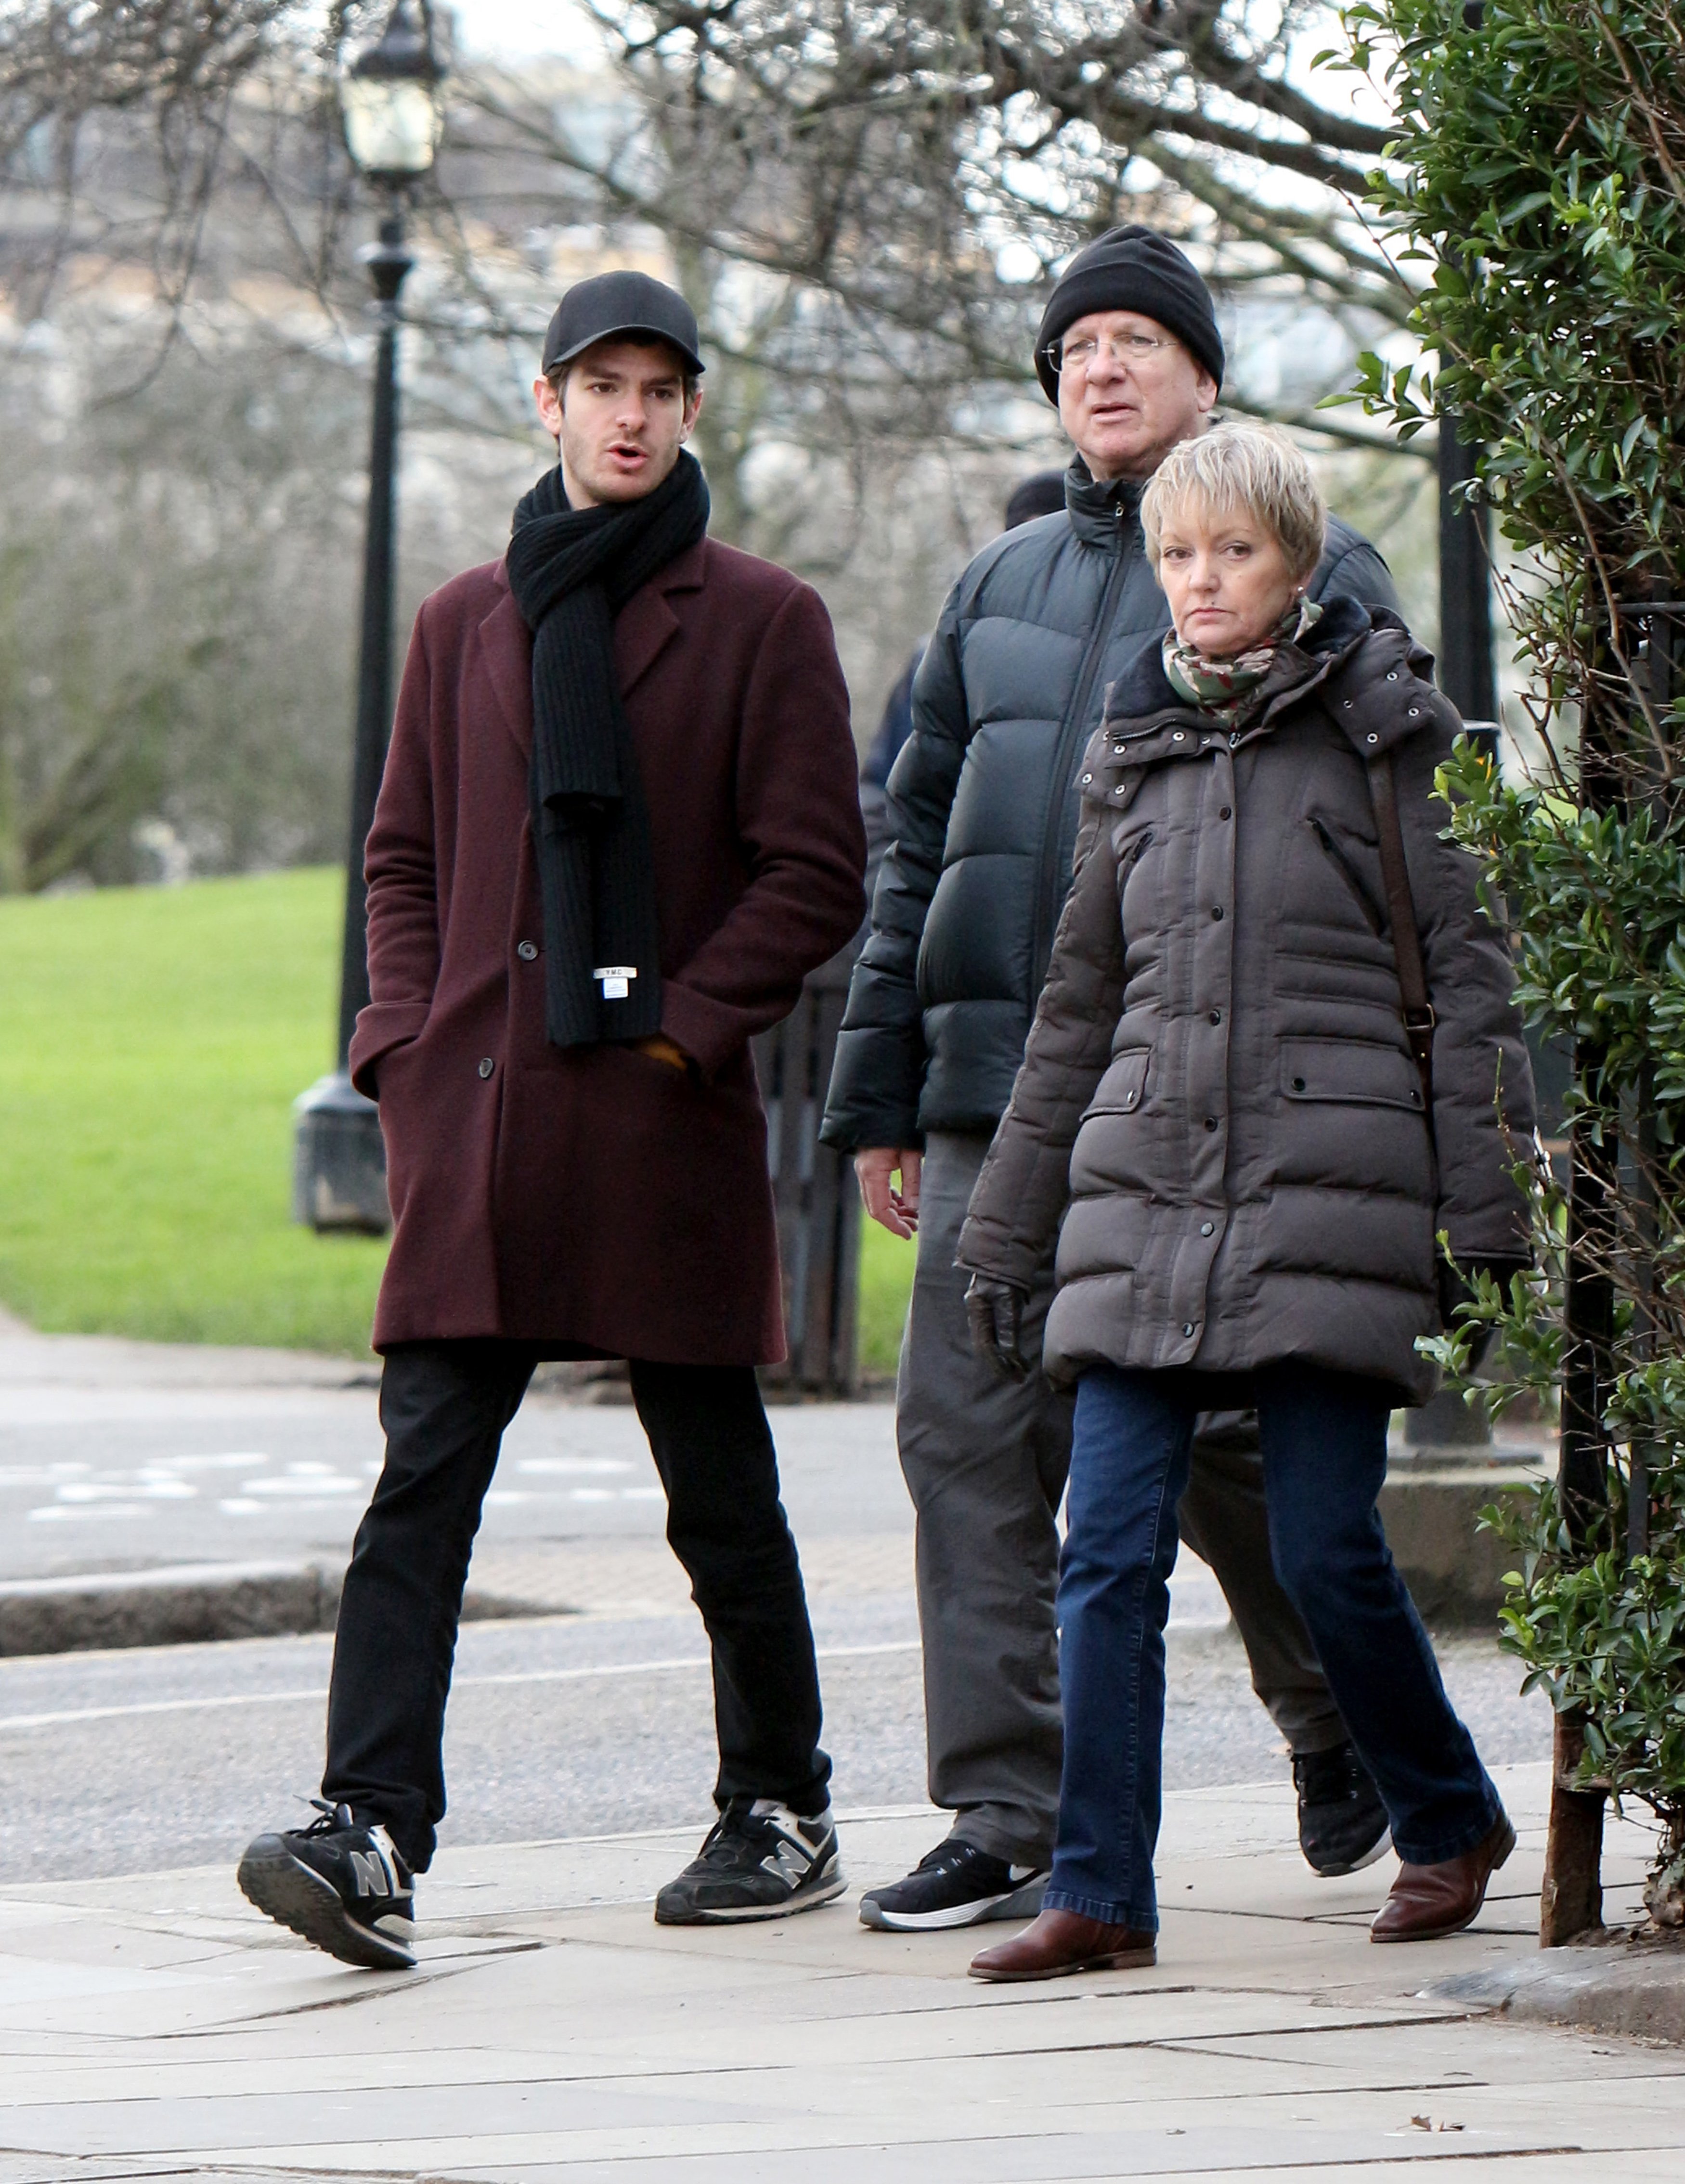 Andrew Garfield, Richard Garfield, and Lynn Garfield while house hunting in London on February 19, 2016 | Source: Getty Images